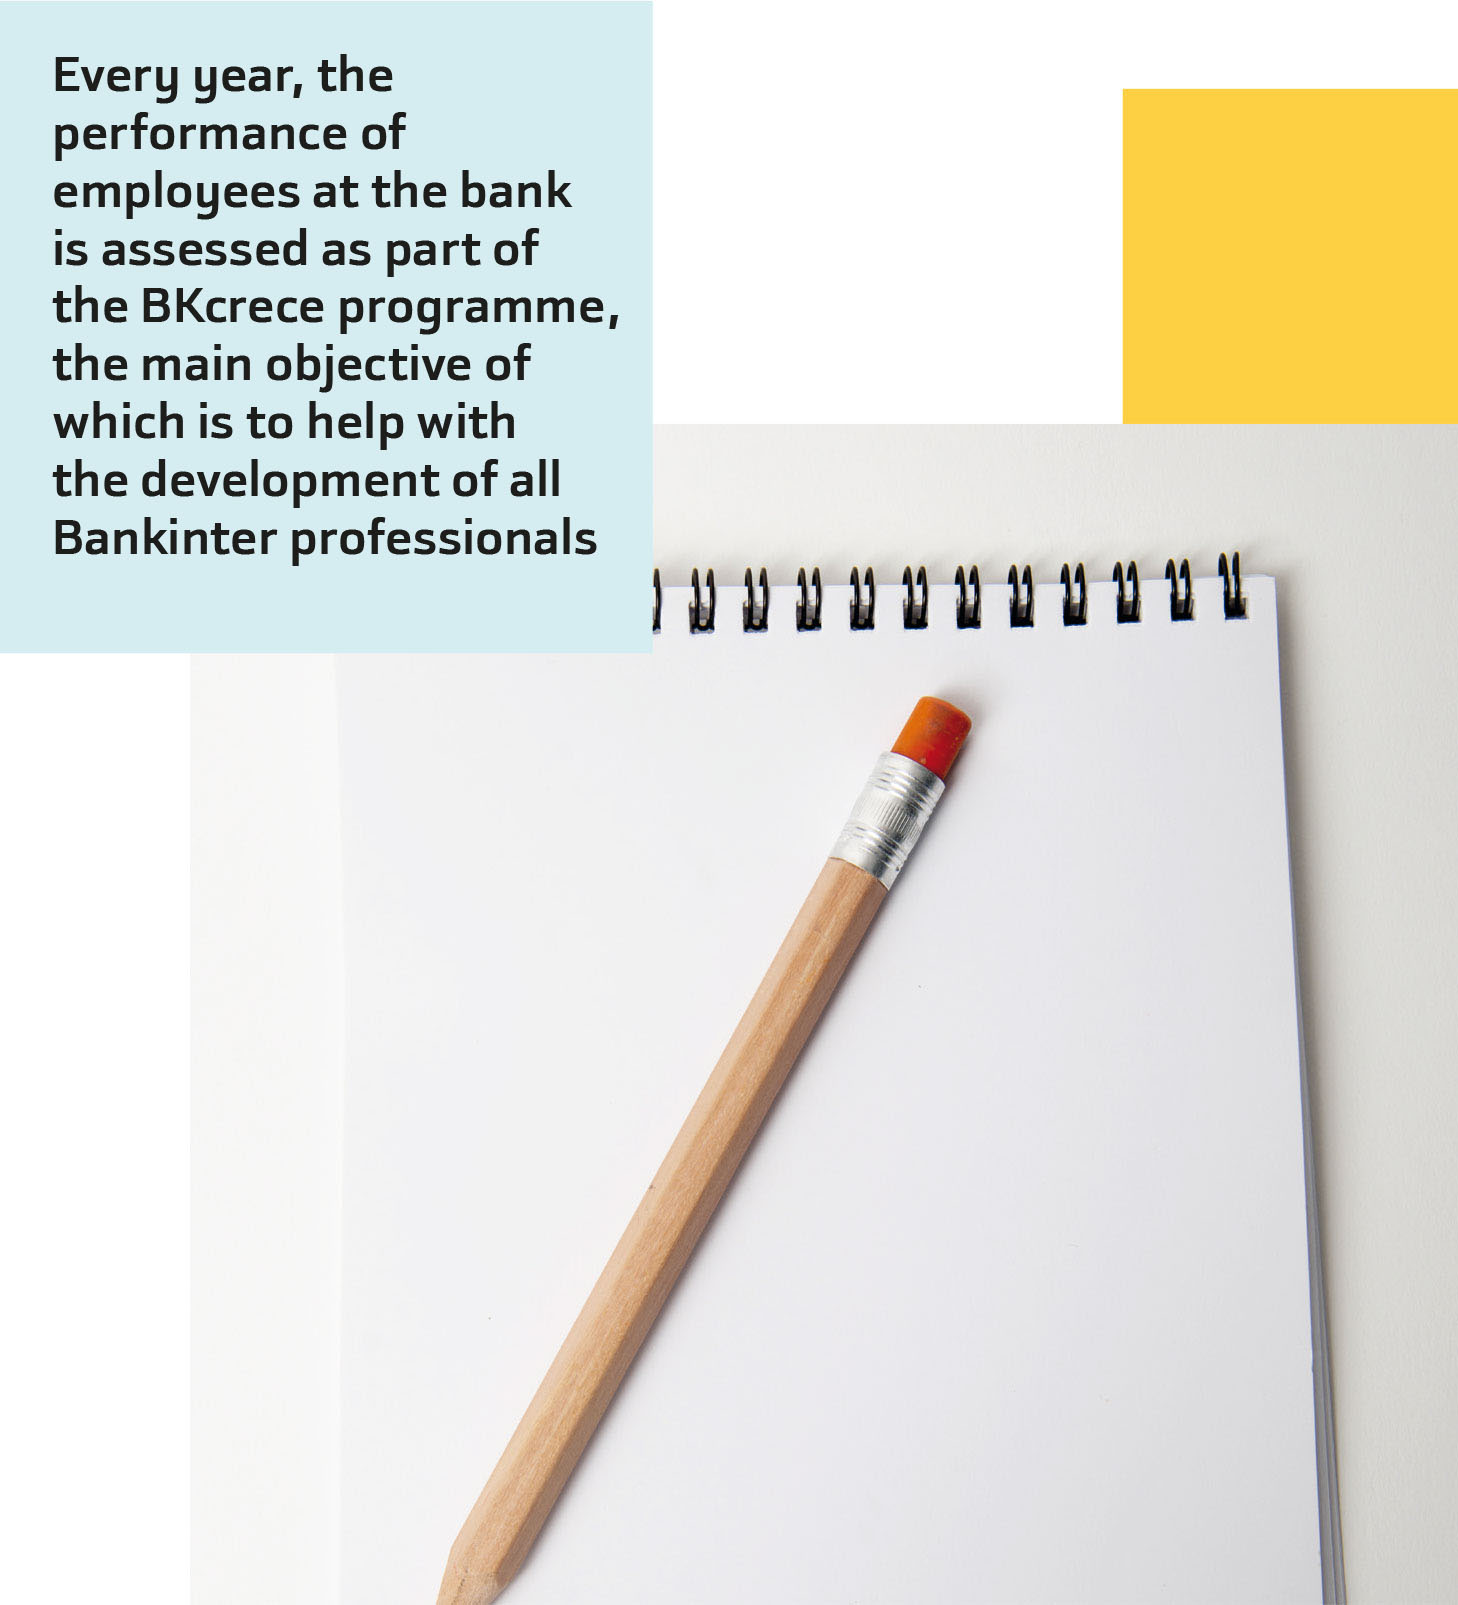 Every year, the performance of employees at the bank is assessed as part of the BKcrece programme, the main objective of which is to help with the development of all Bankinter professionals